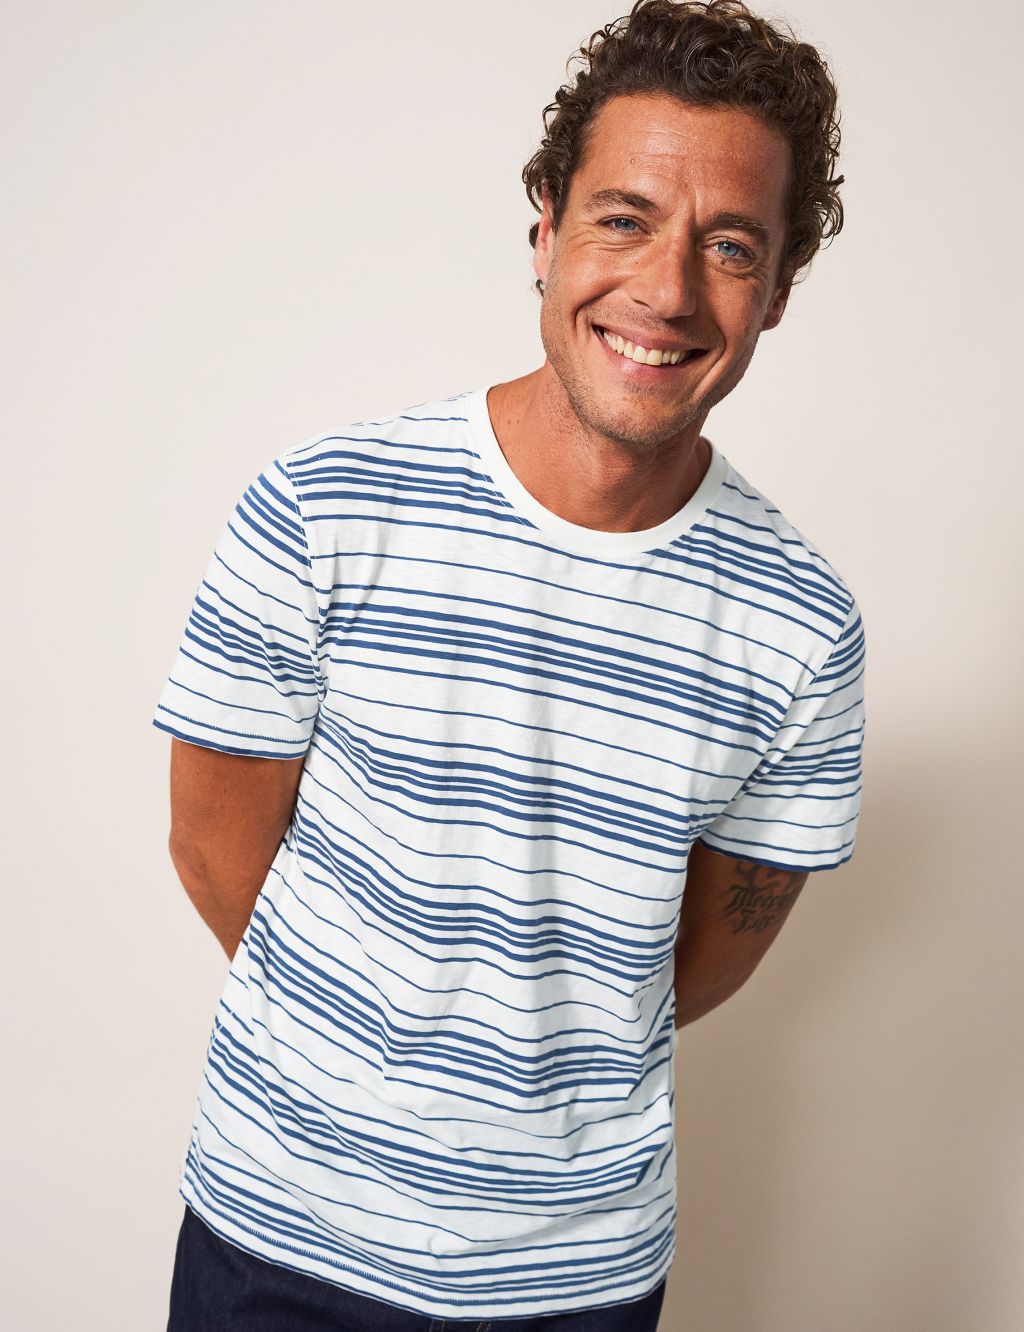 Relaxed Fit Pure Cotton Striped T-Shirt image 1